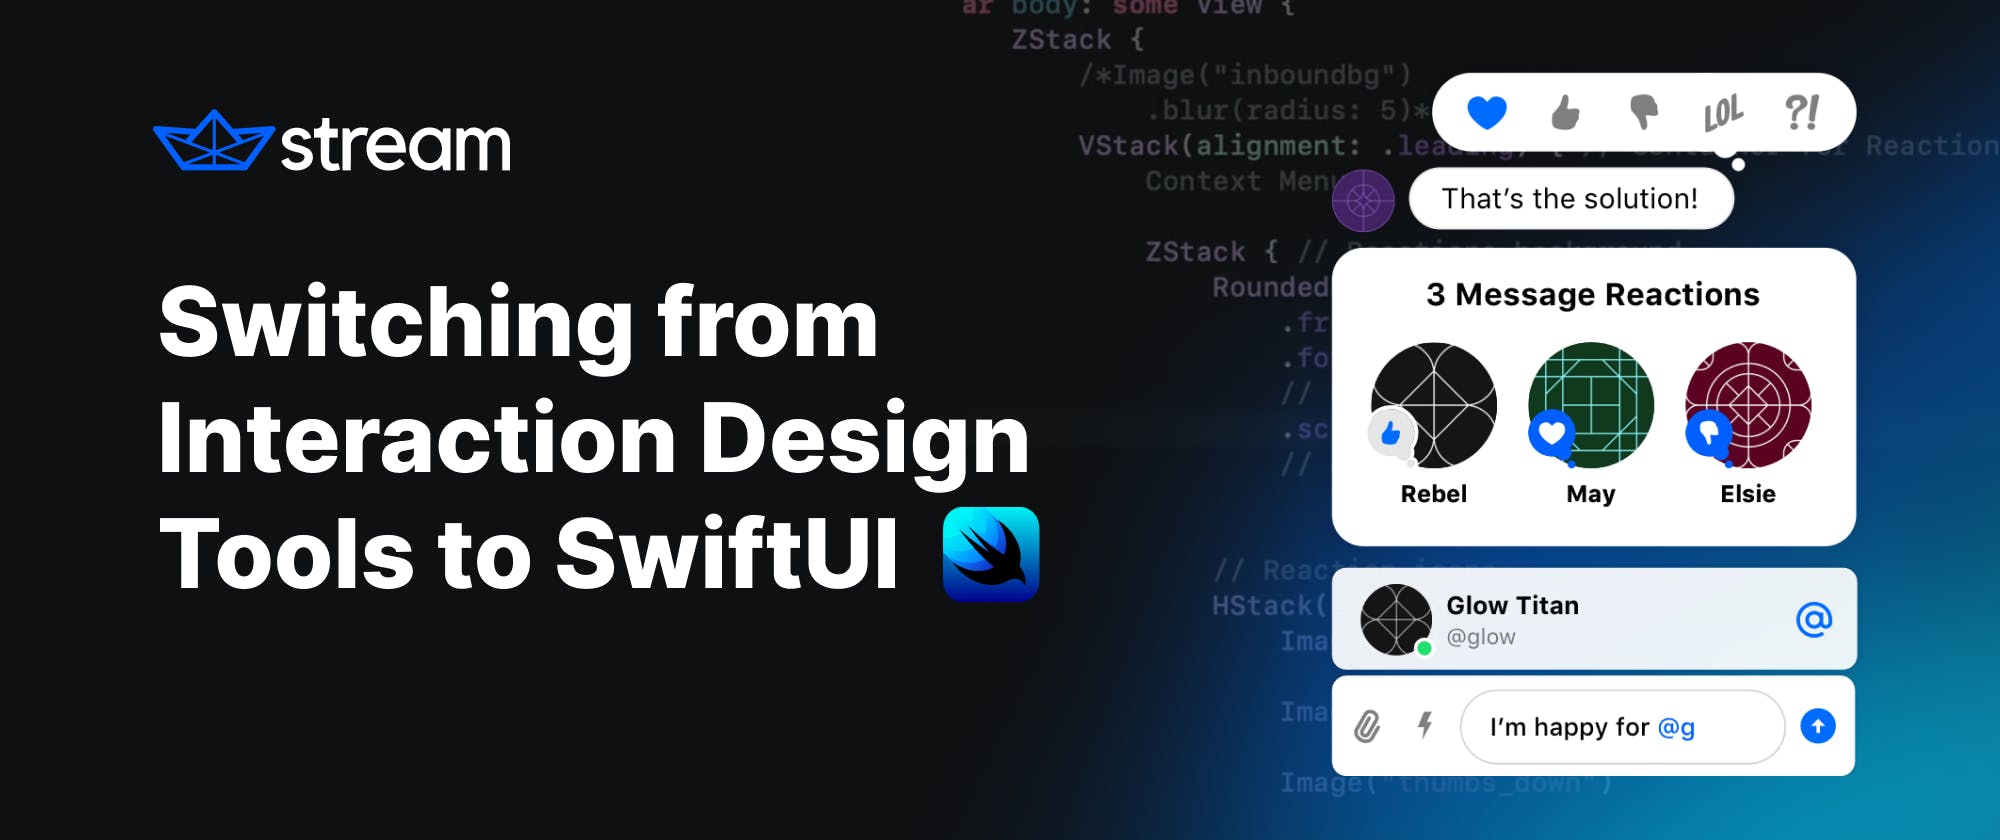 Switching to SwiftUI Design Tools